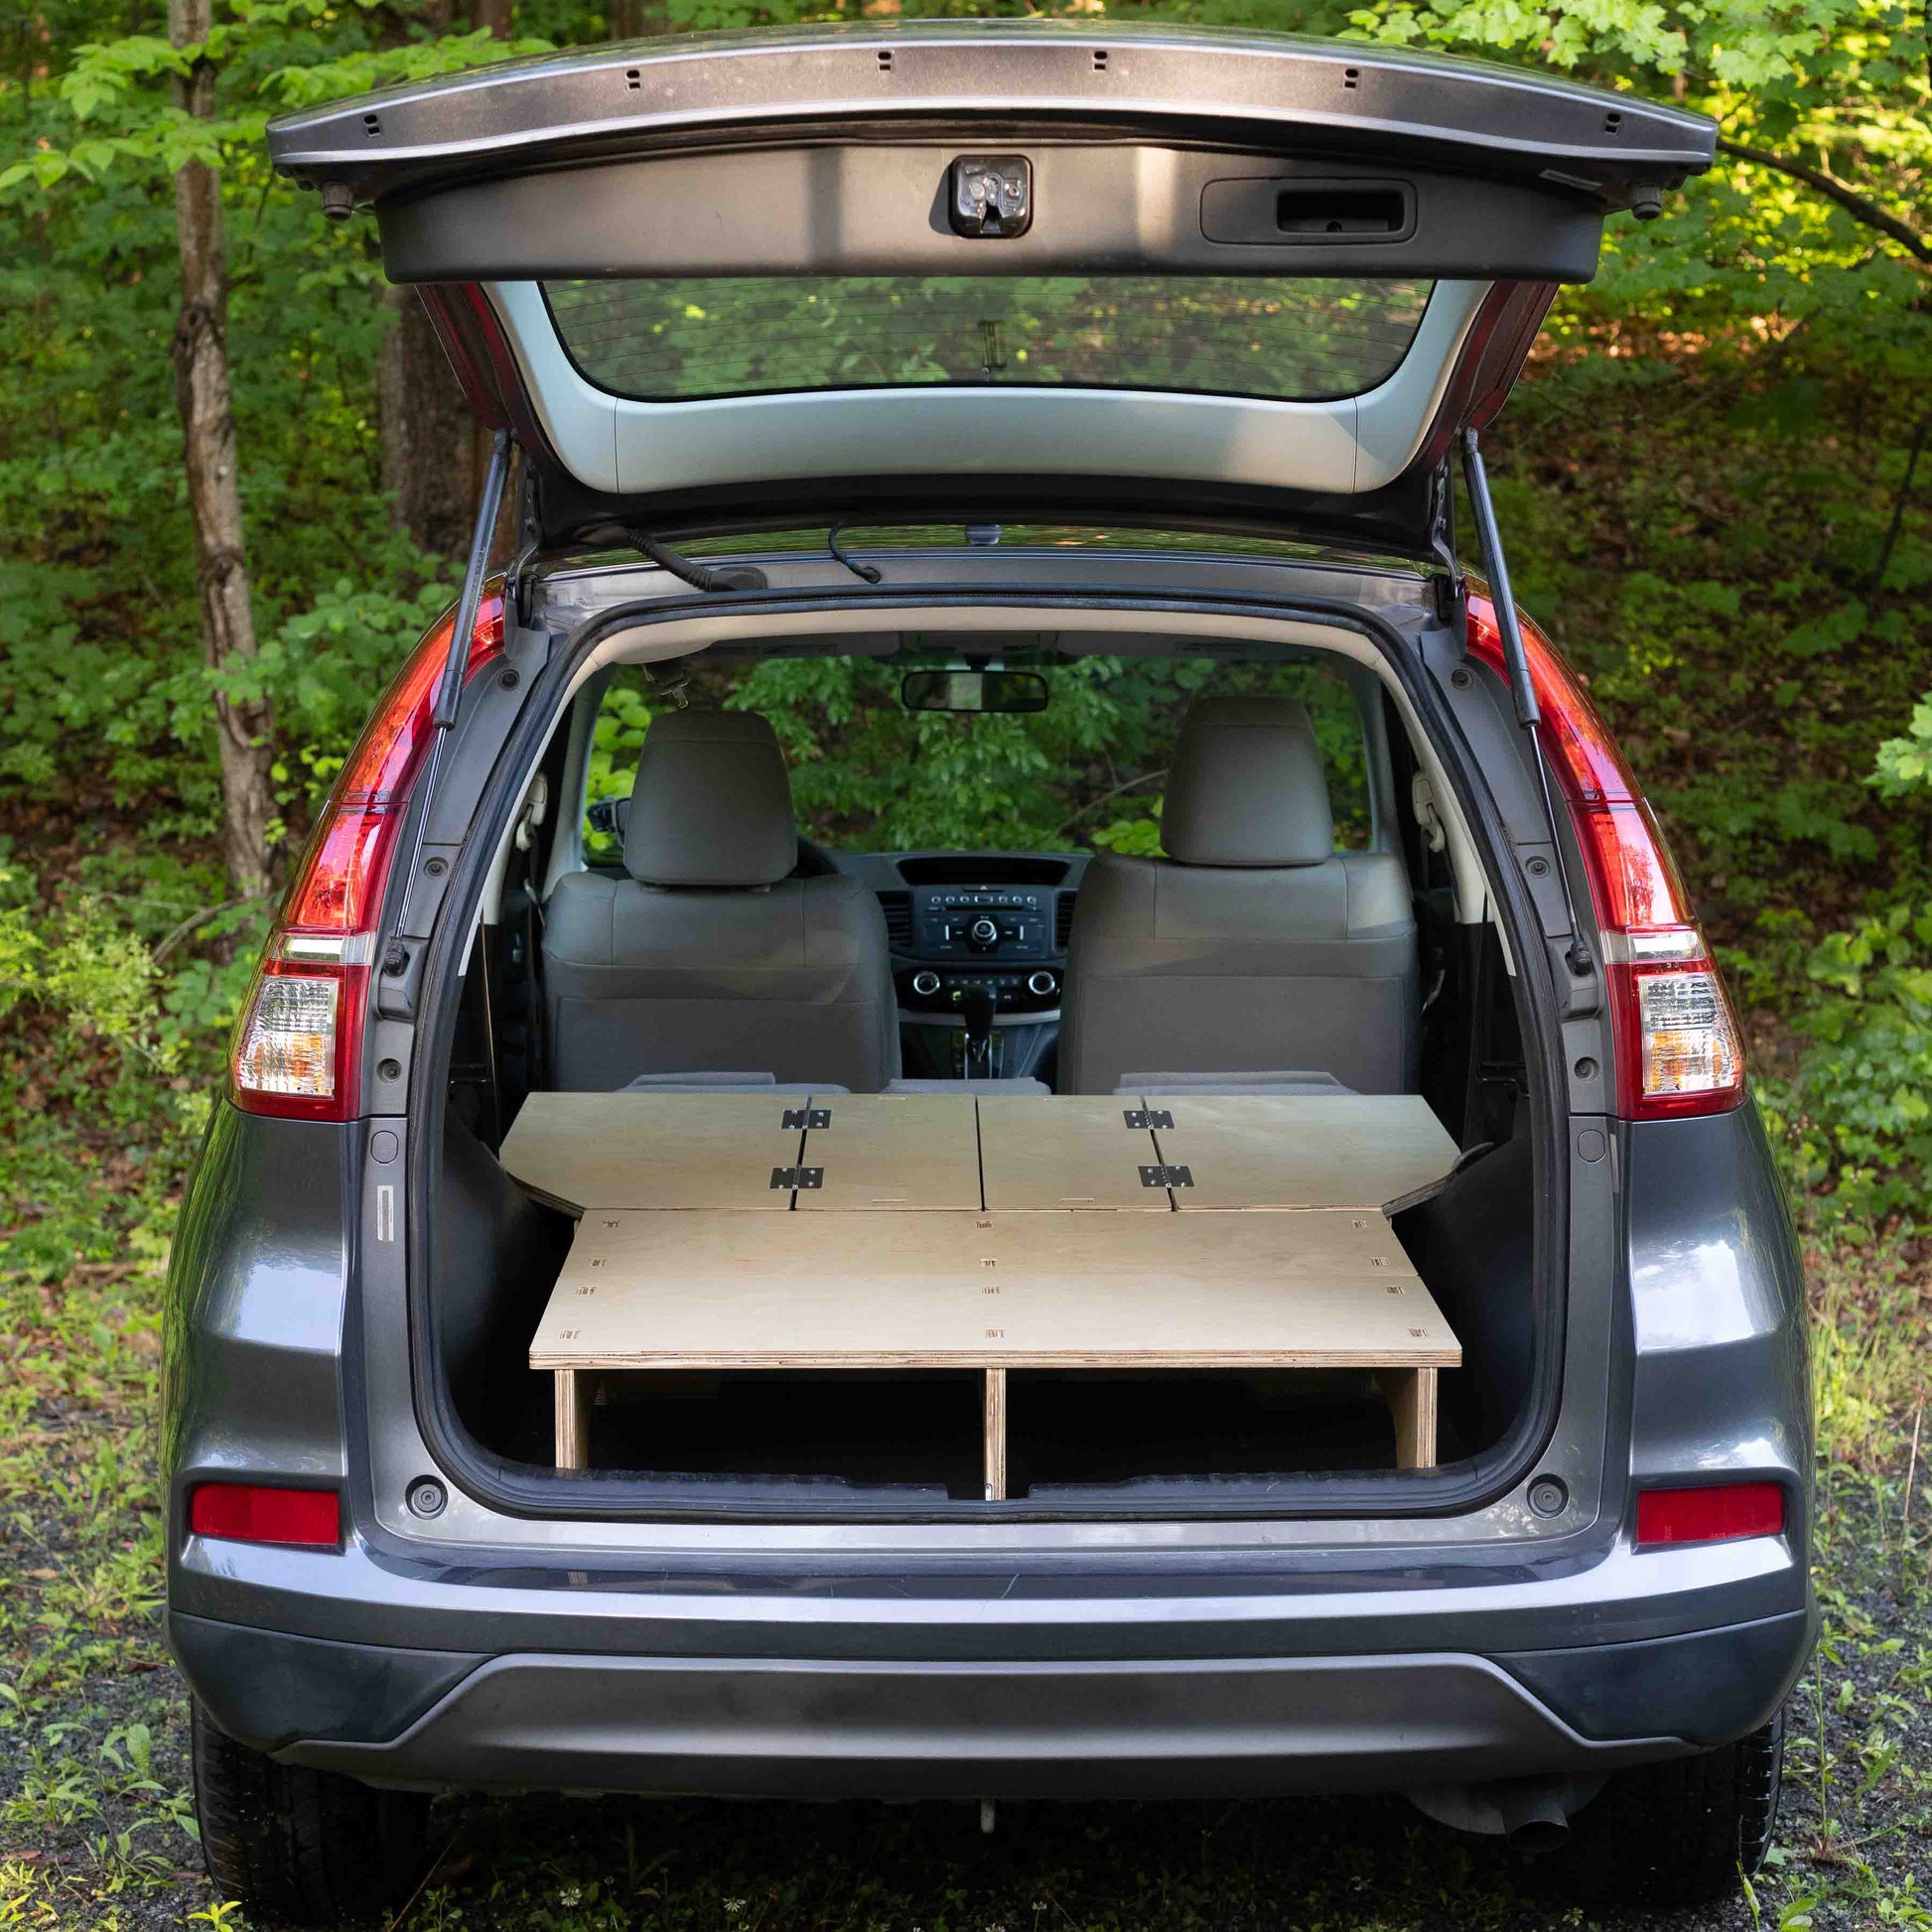 The trunk of a CarToCamp honda cr - v with a Sleeping Platform in it.